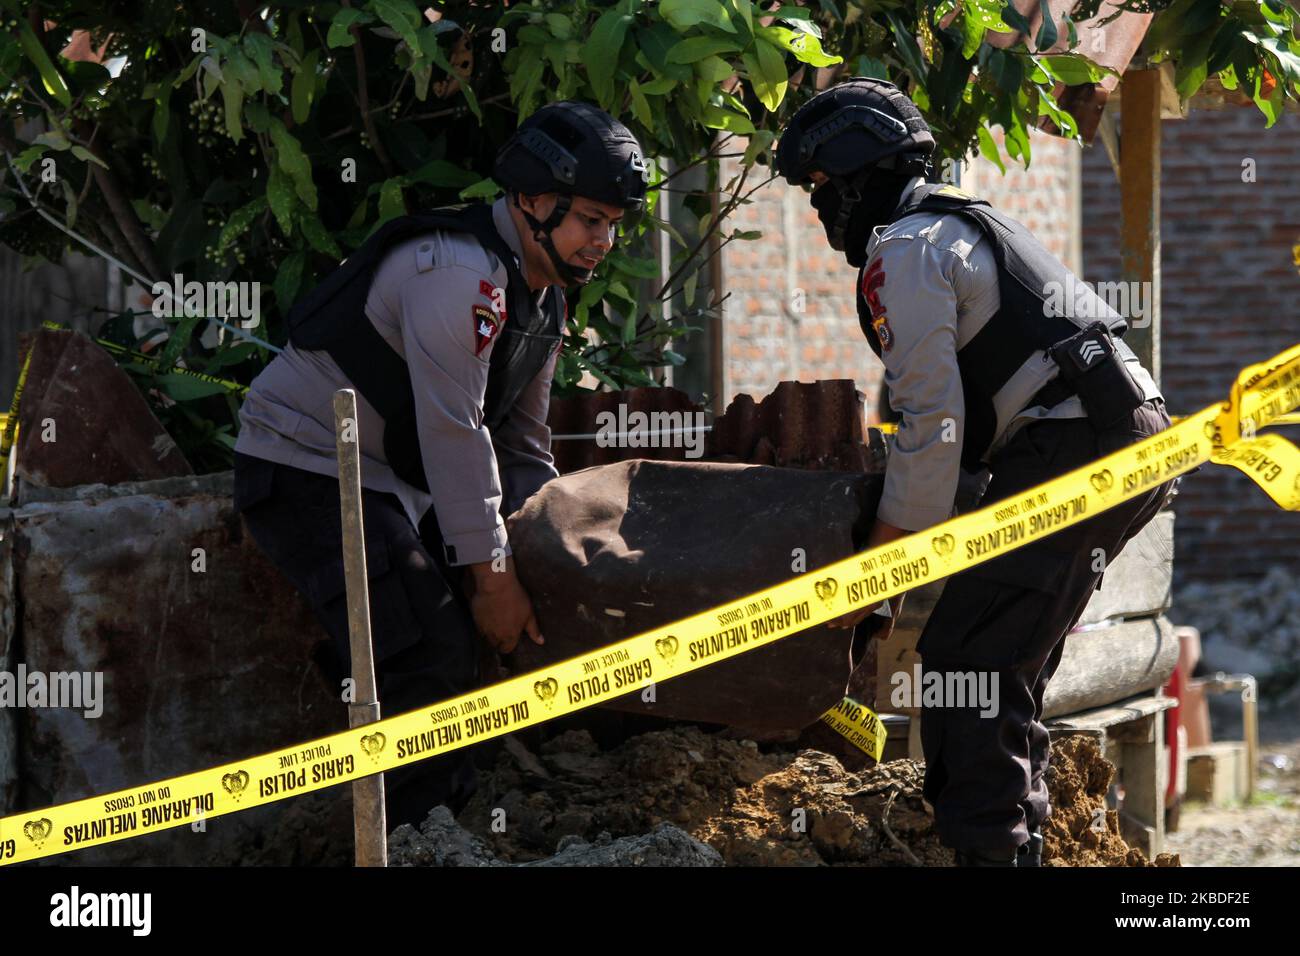 Members of the Indonesian bomb squad evacuated an object suspected of being a bomb at a residential area in Lhokseumawe, on December 25, 2019, Aceh, Indonesia. The object, which has a length of around 50 cm, was discovered accidentally by residents who were digging in the yard, allegedly as a remnant of a bomb from a conflict that had occurred in Aceh. (Photo by Fachrul Reza/NurPhoto) Stock Photo